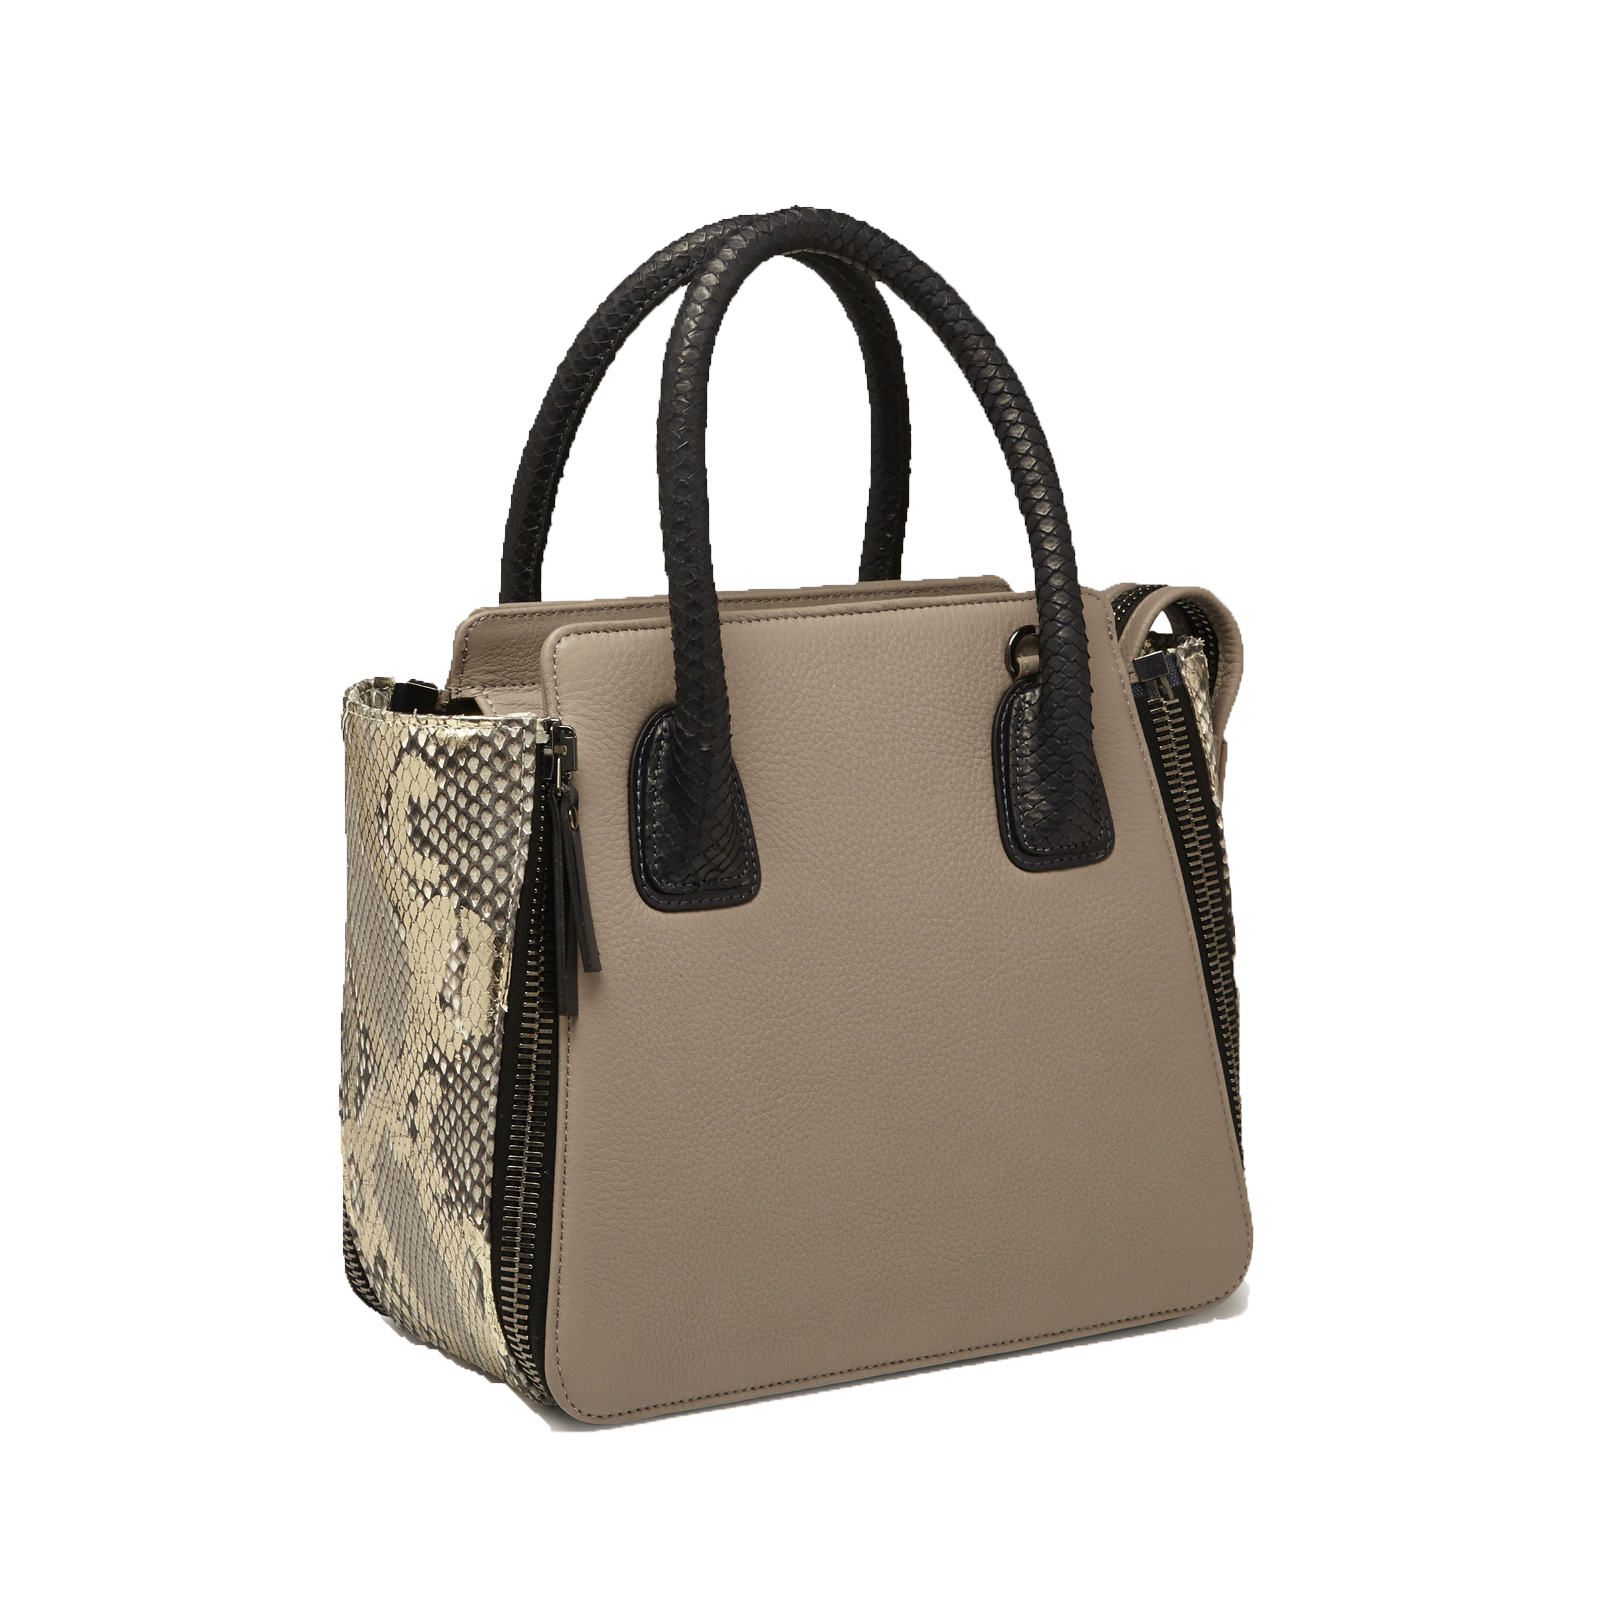 The Taupe Leather Blakeley Bag